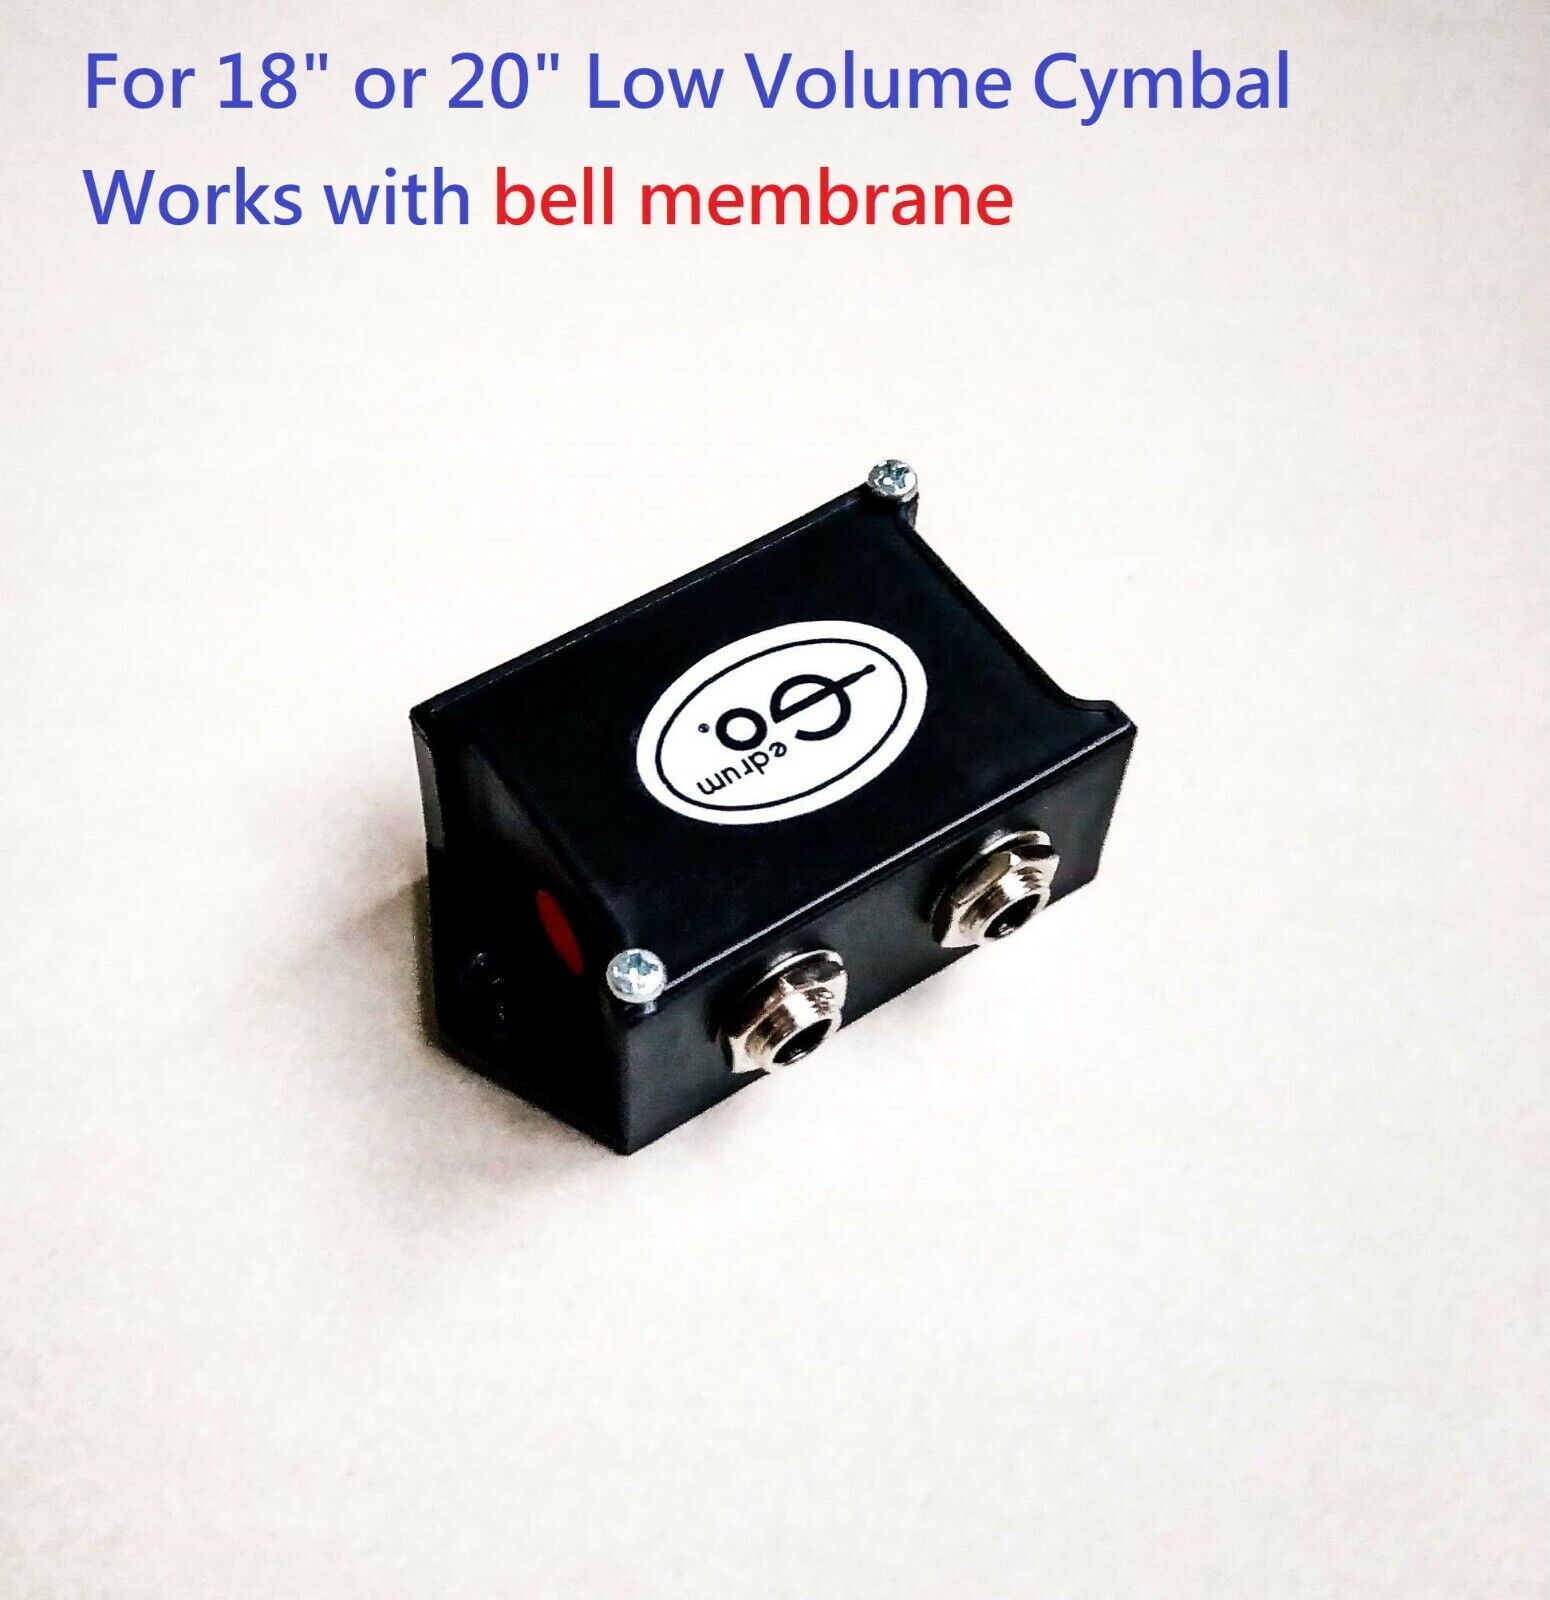 Goedrum 360 Cymbal Trigger for DIY 18\